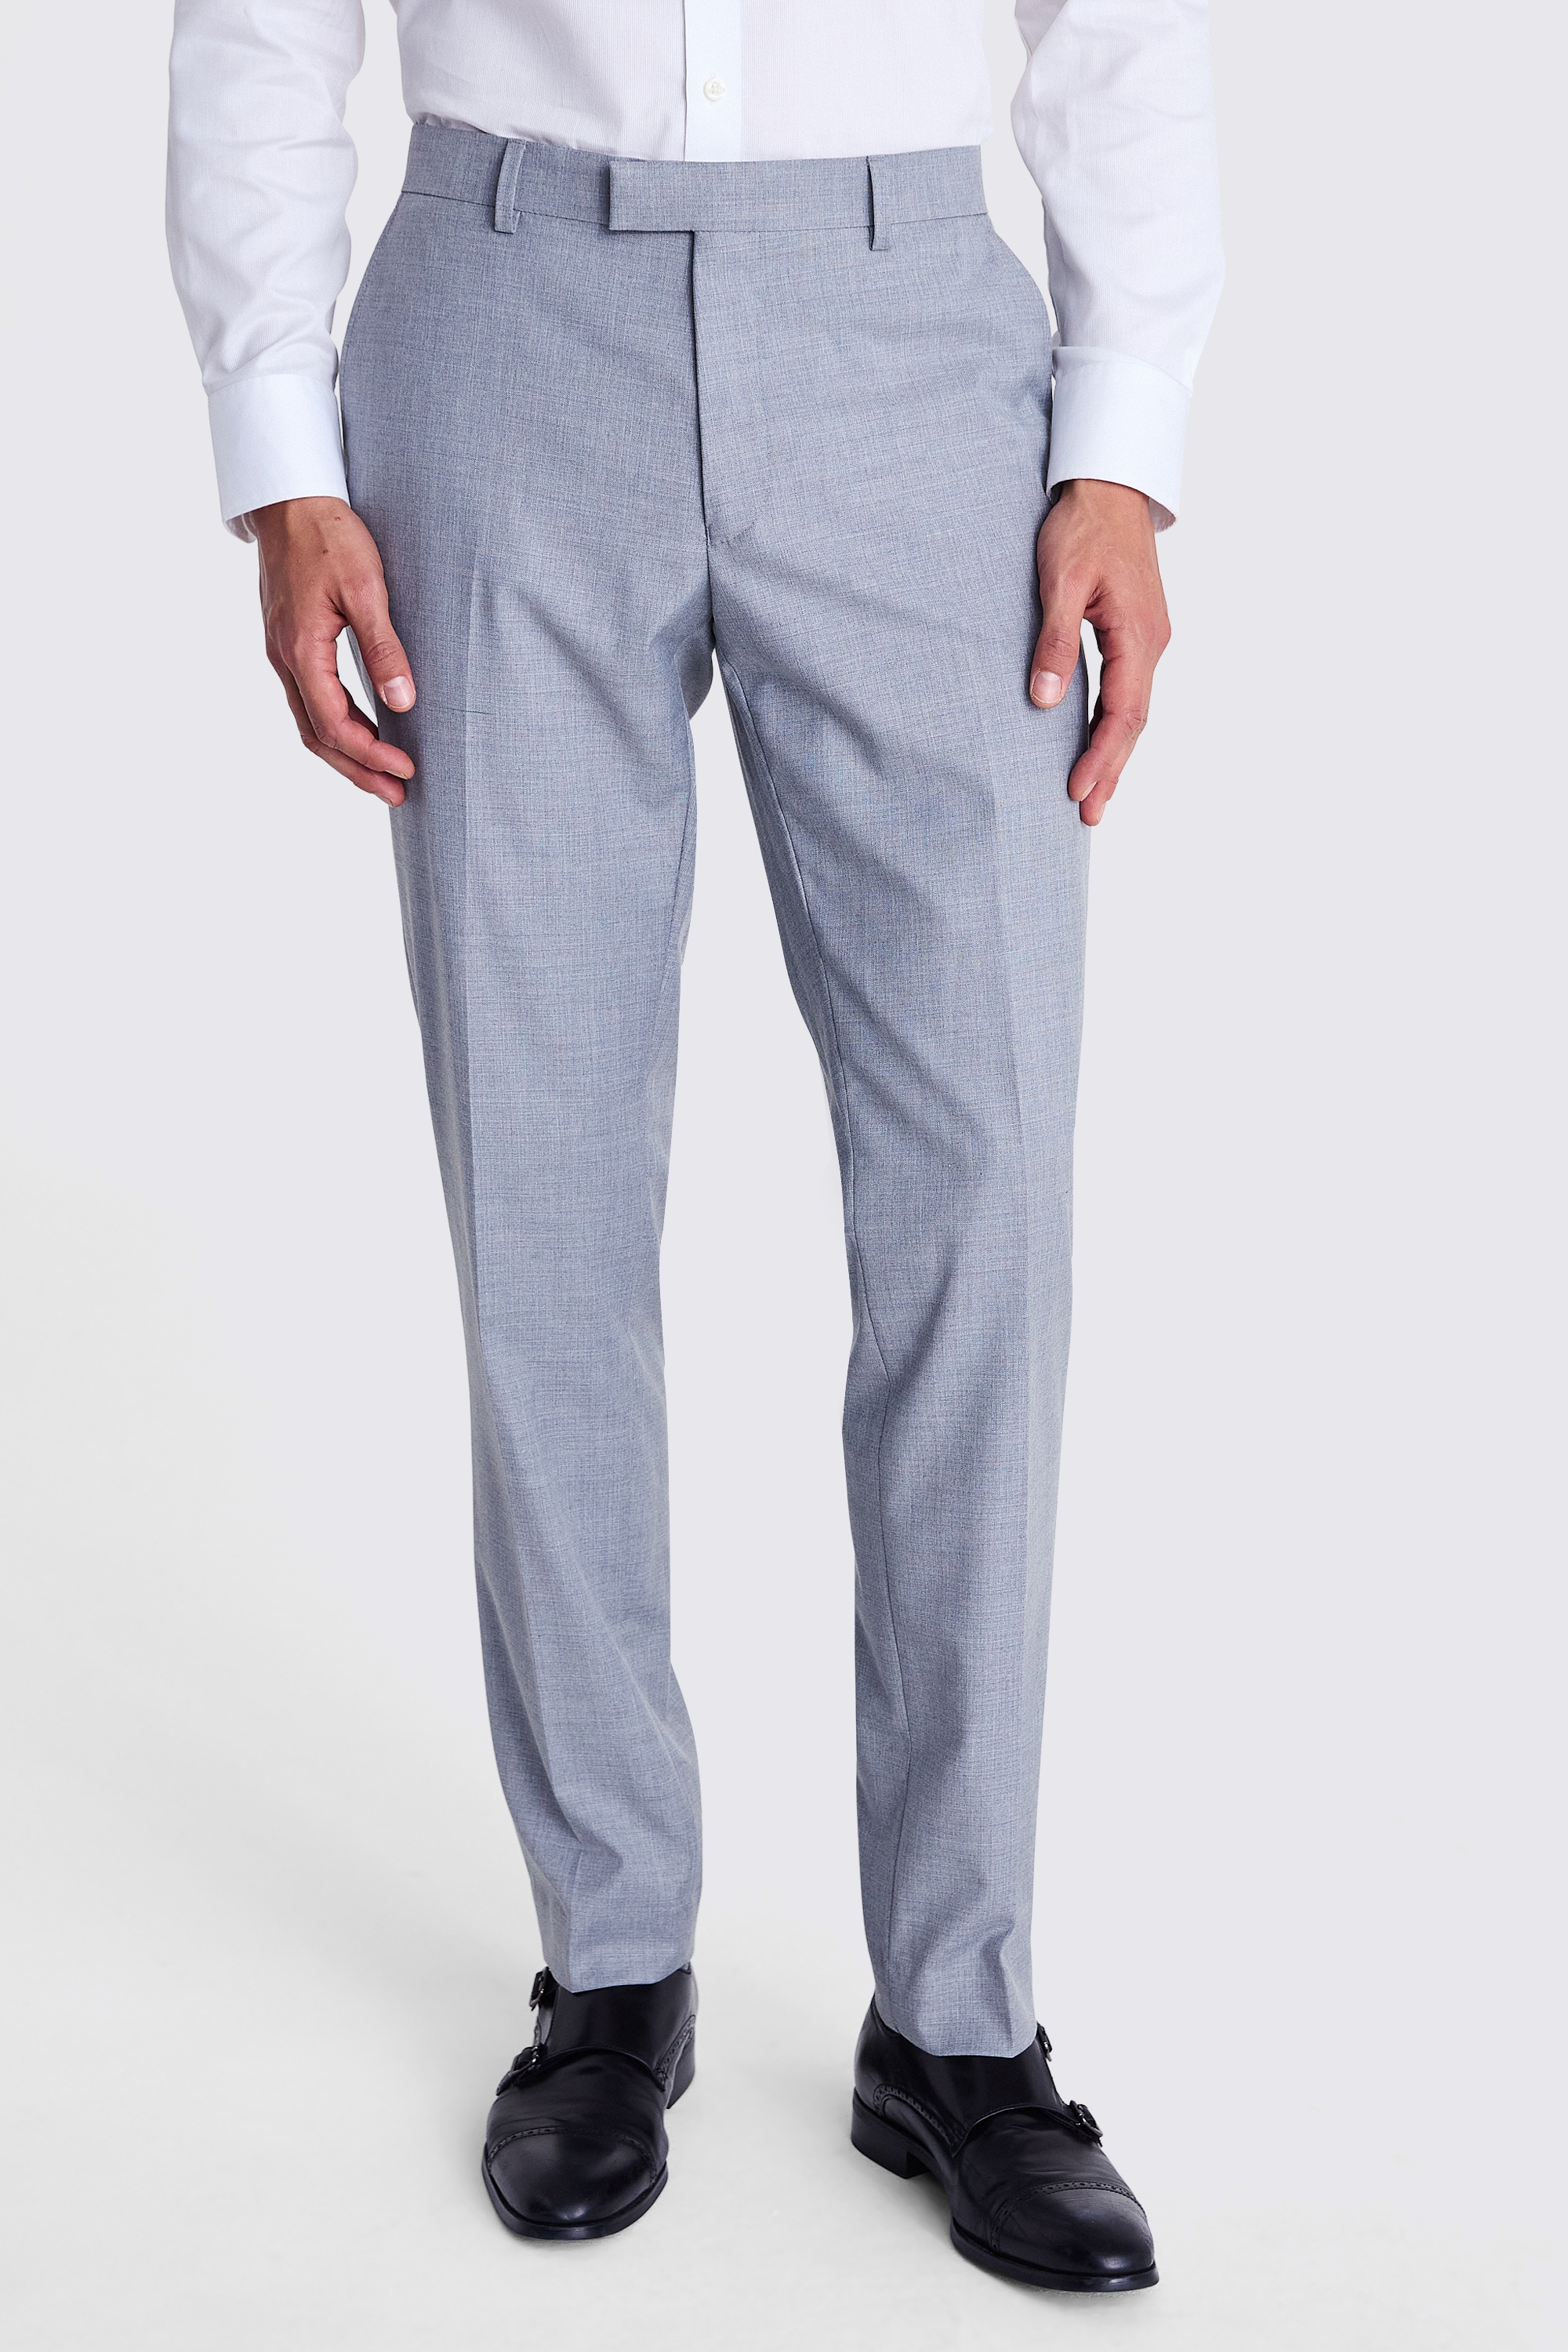 Slim Fit Grey Stretch Trousers | Buy Online at Moss